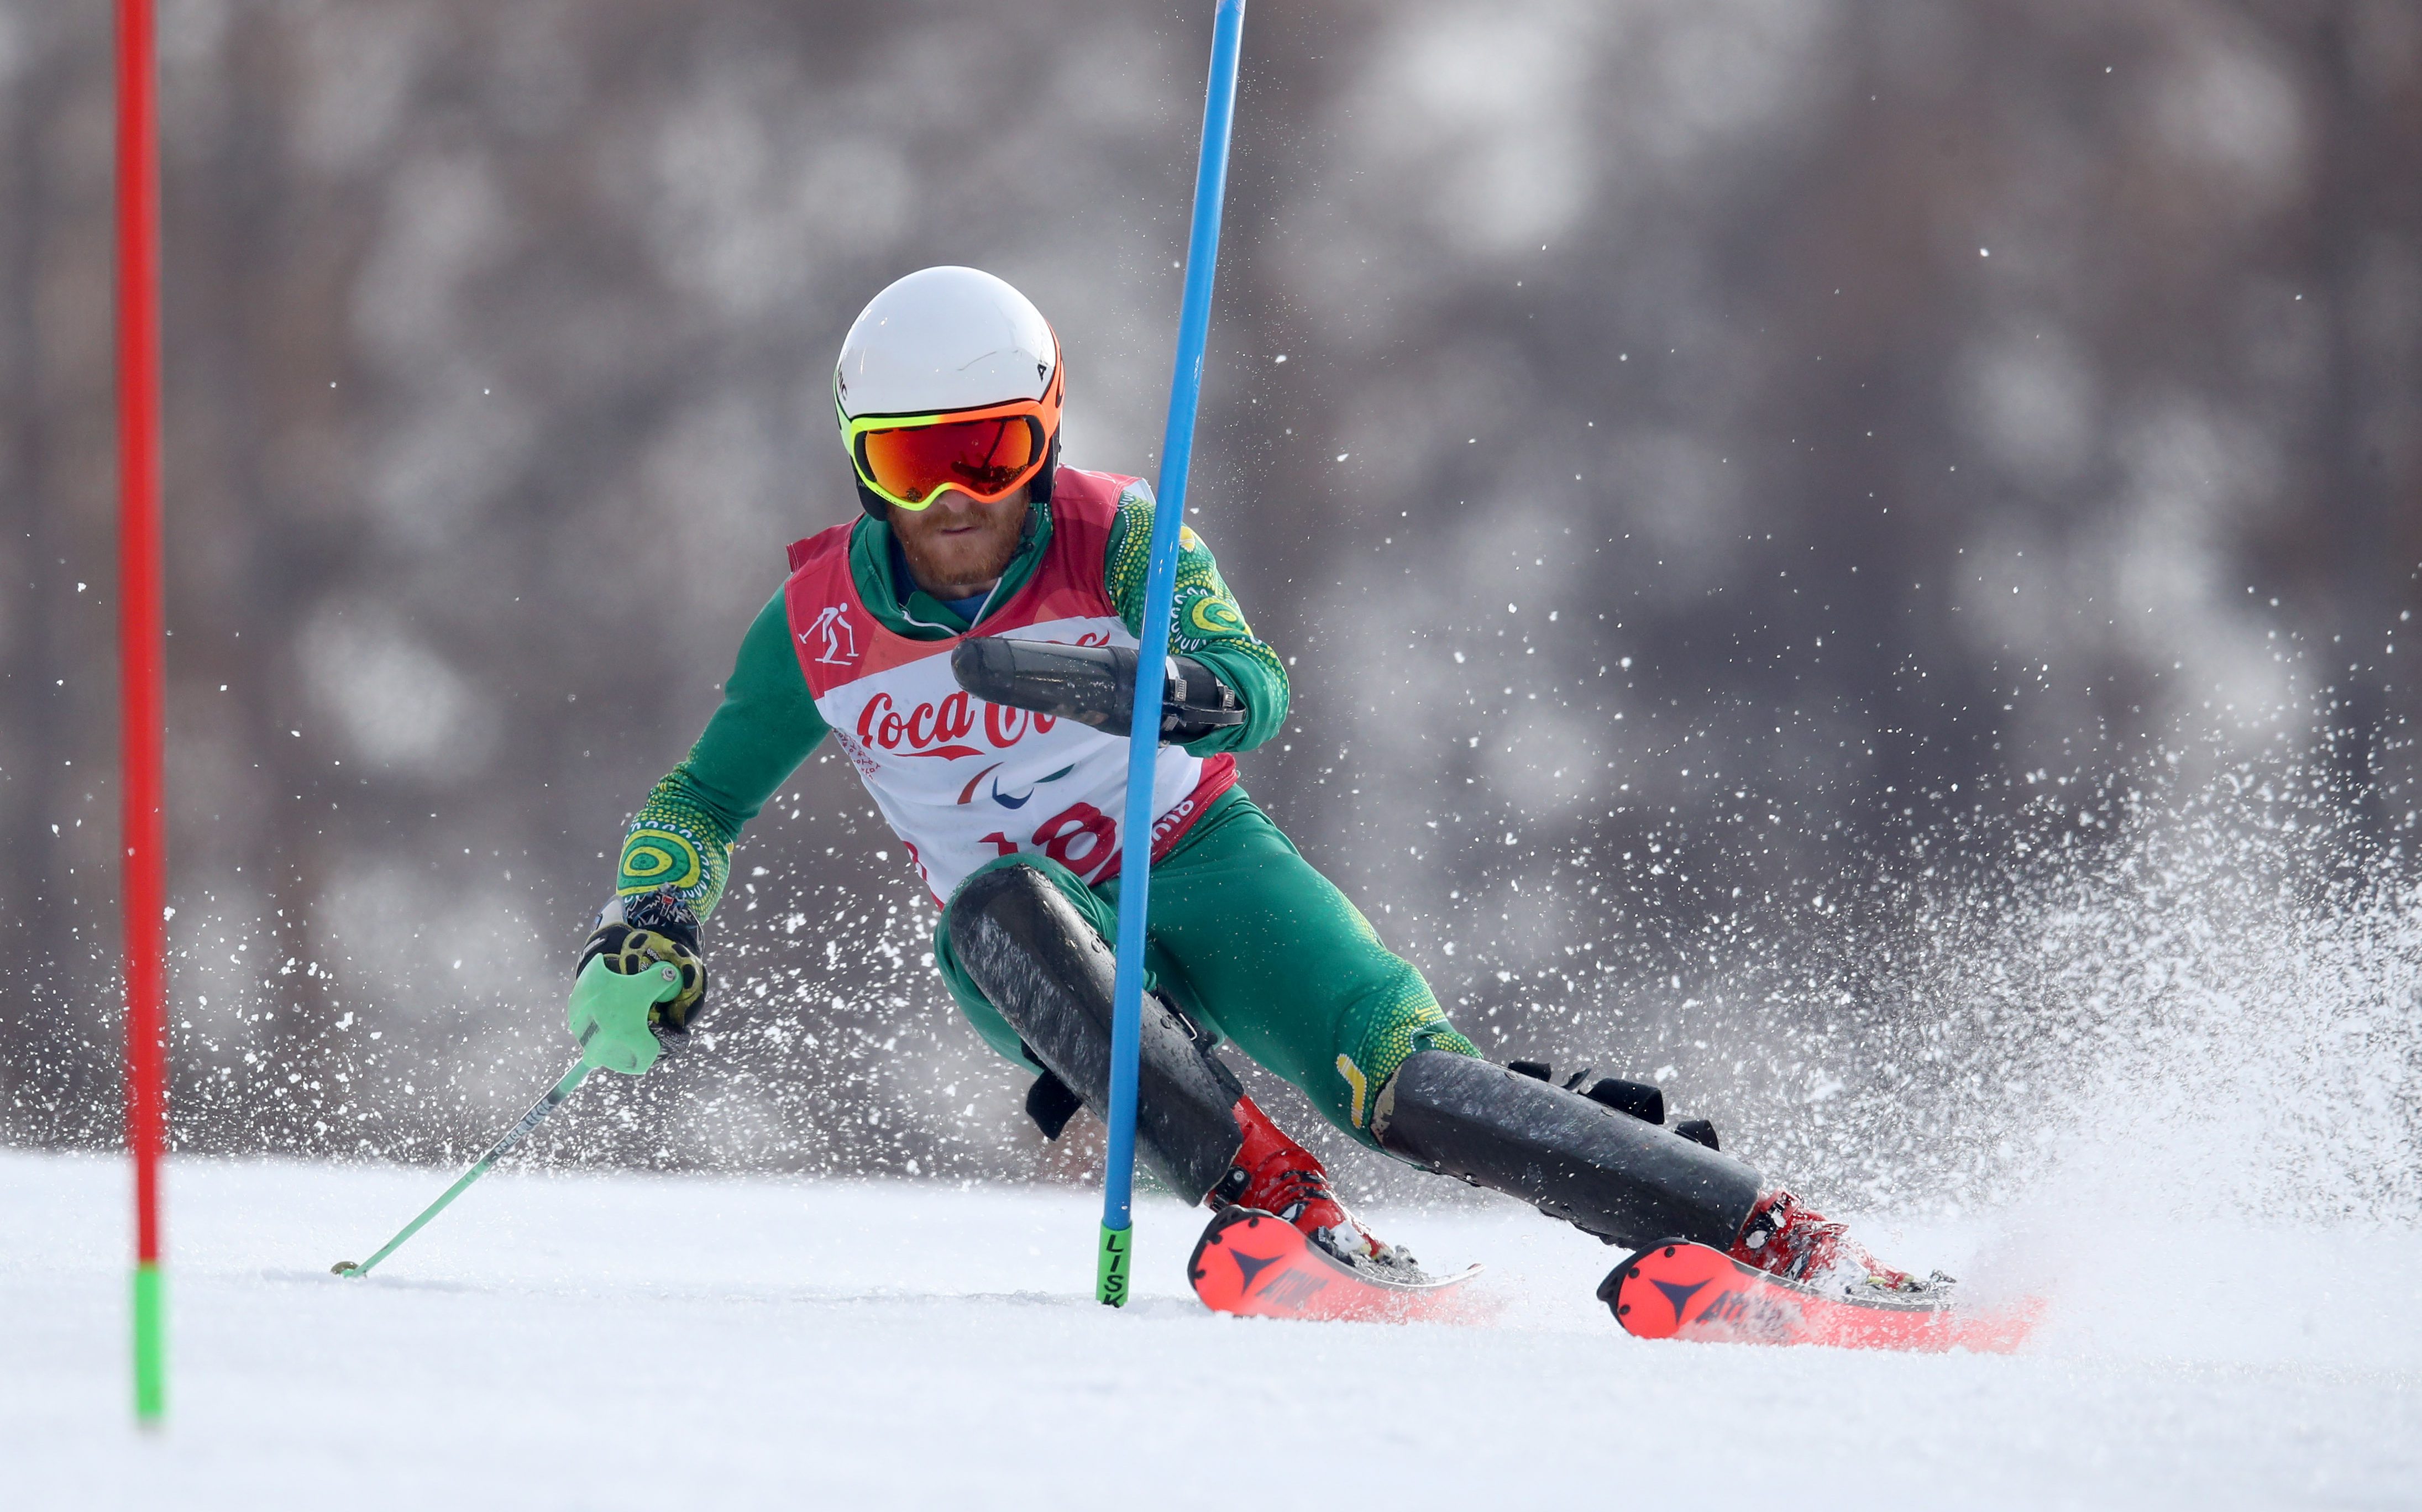 Bronze for Gourley at World Para-alpine Skiing Championships